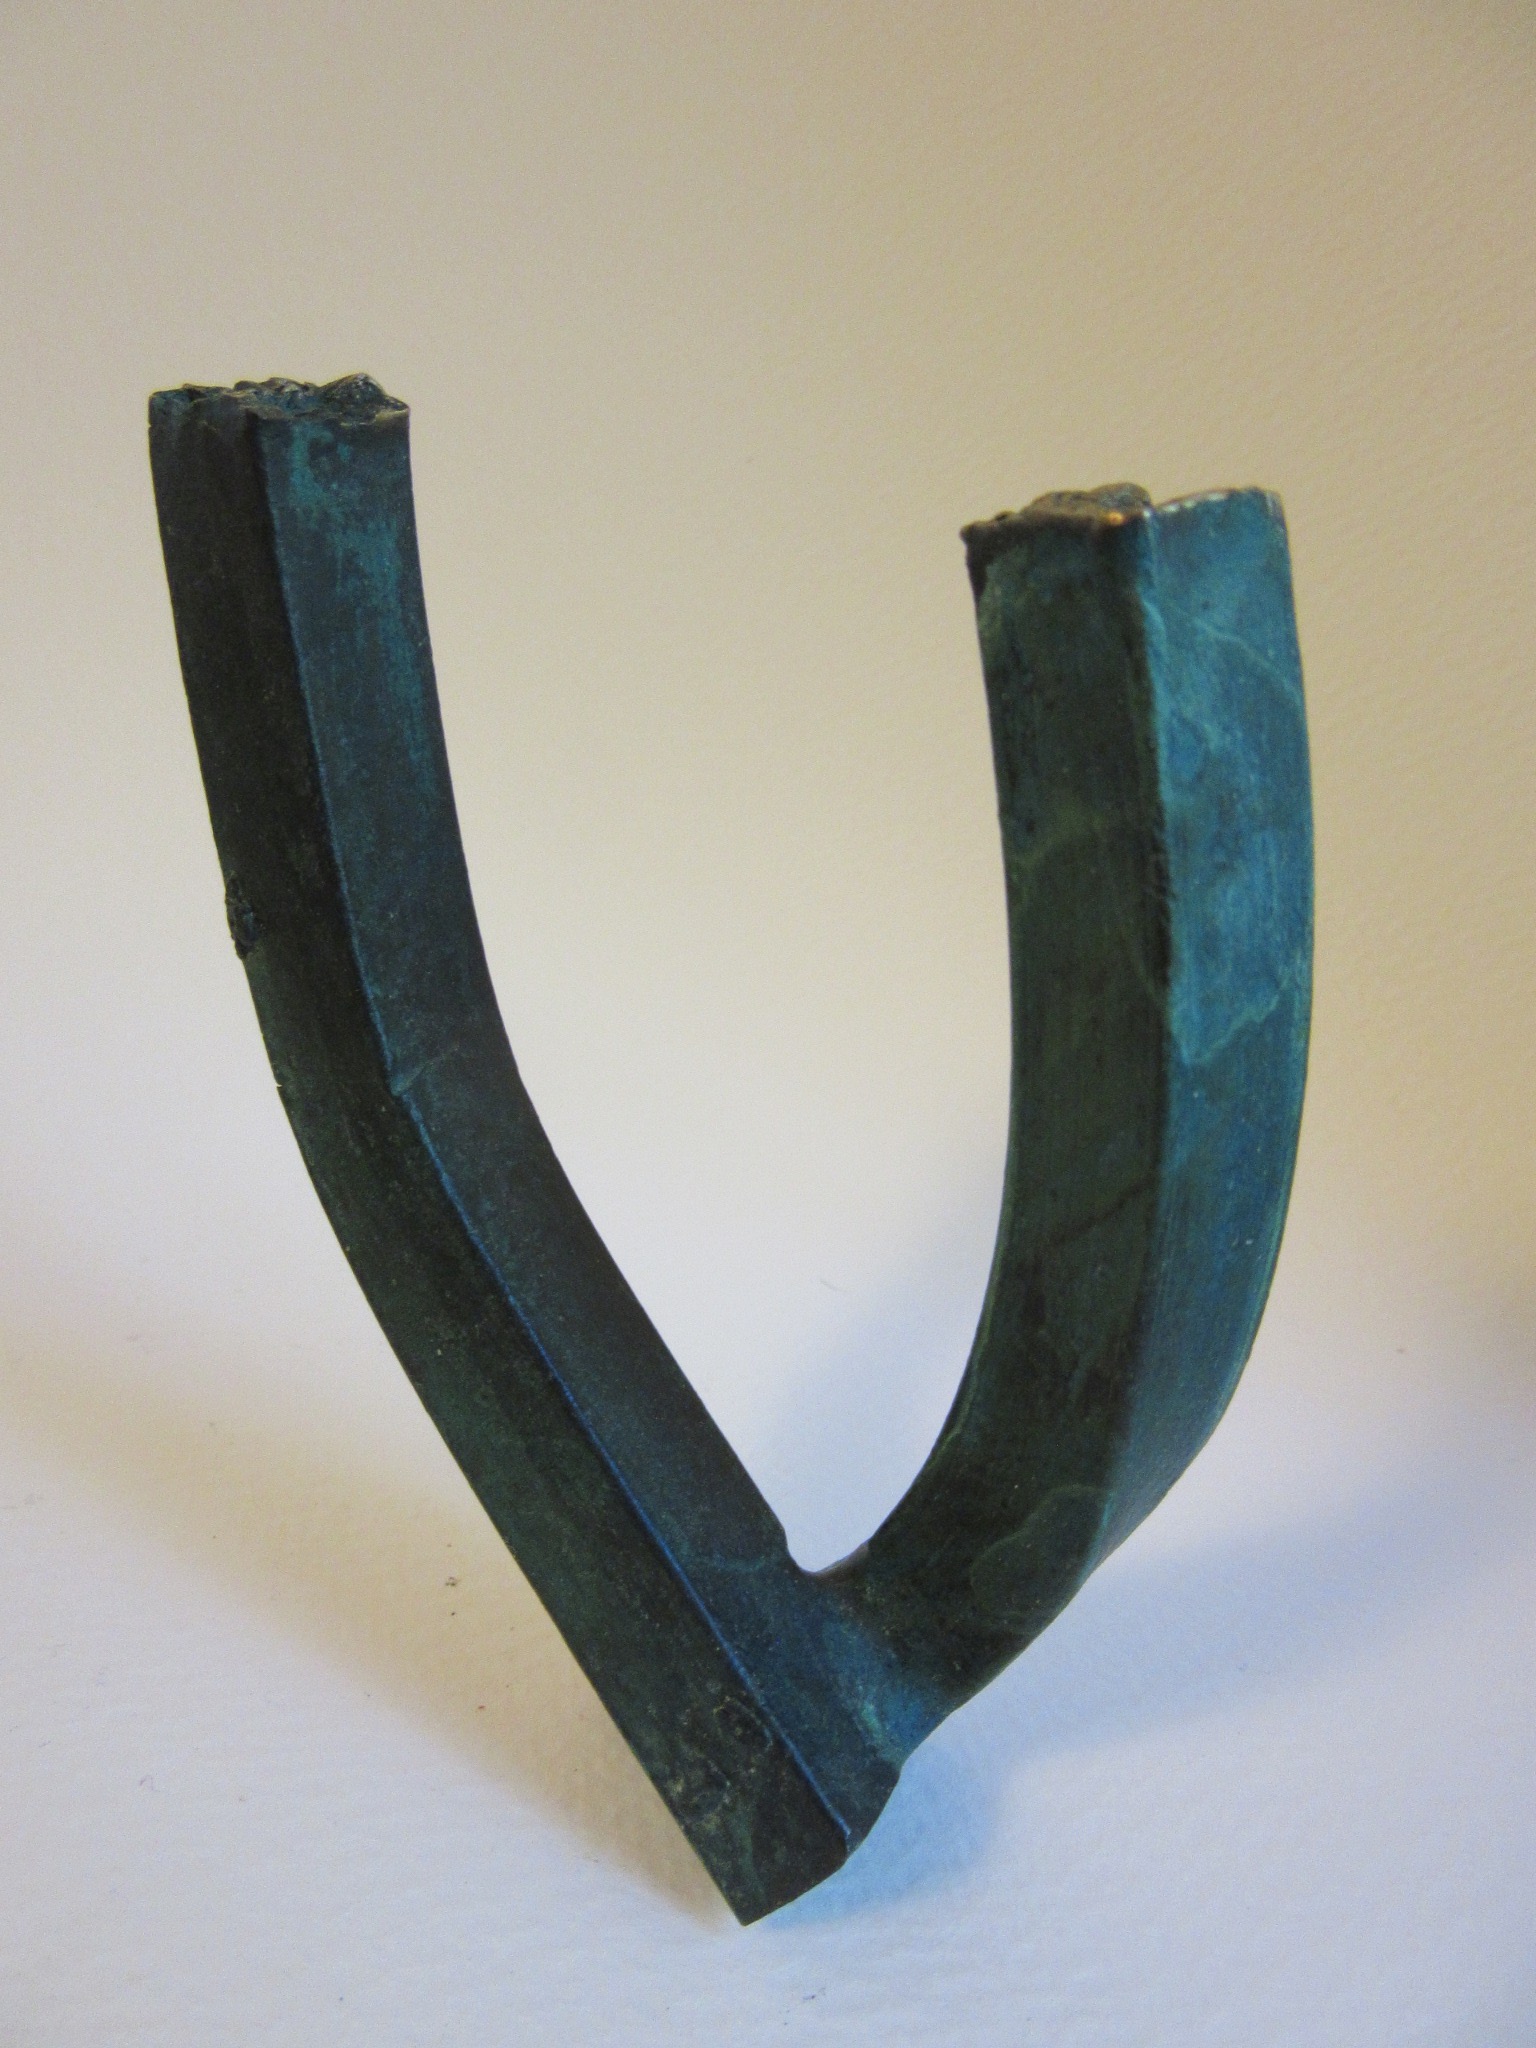   Untitled , bronze 4" x 3" Gifted 